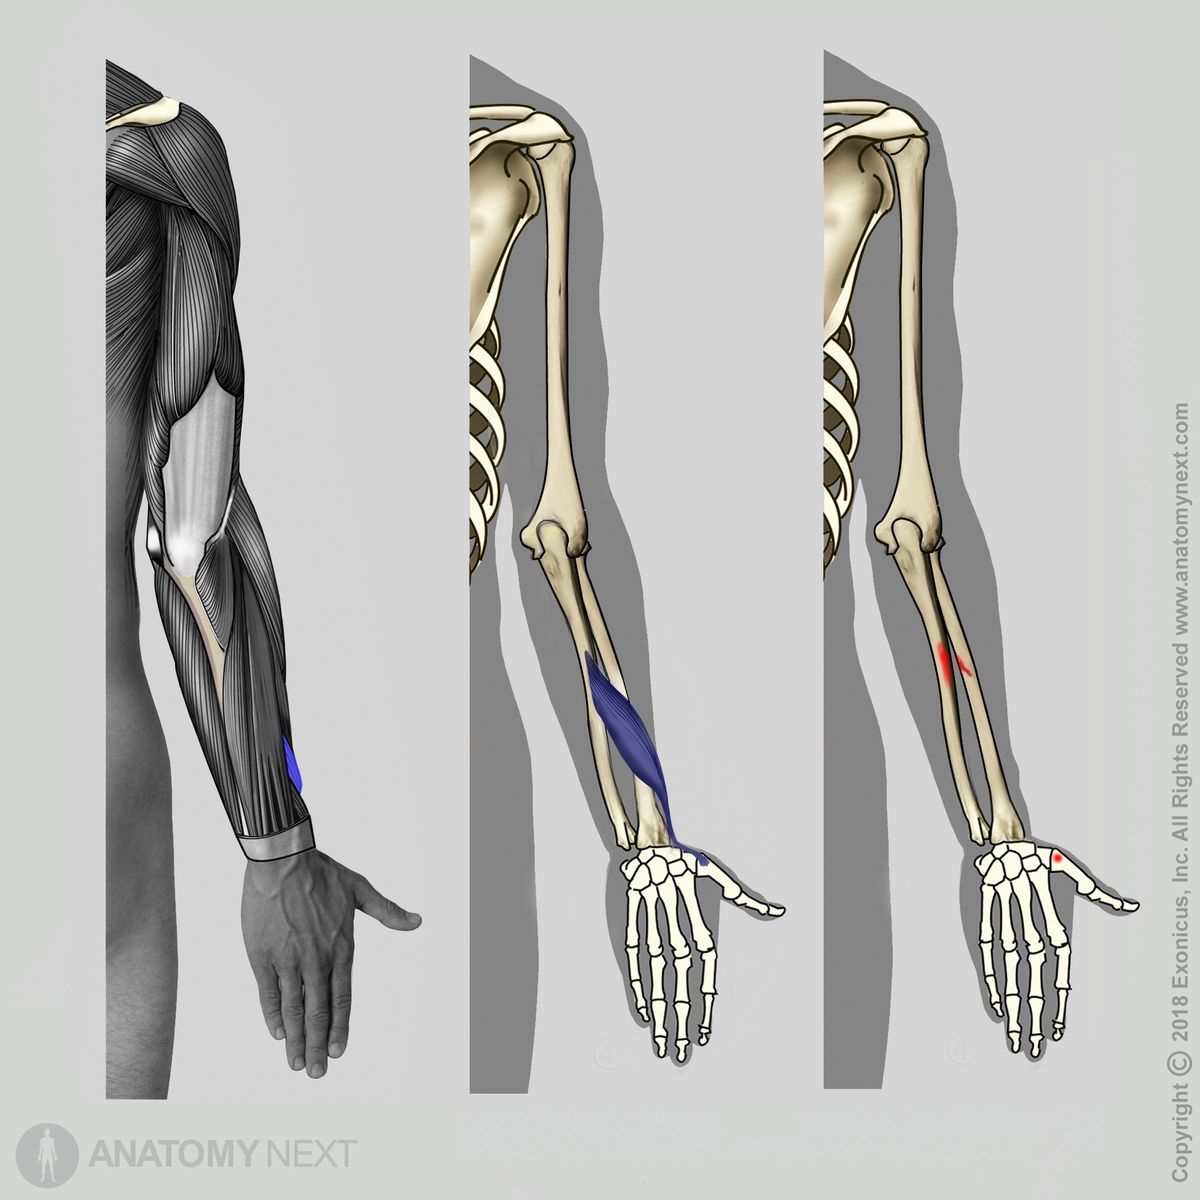 Abductor pollicis longus, Origin of abductor pollicis longus, Insertion of abductor pollicis longus, Forearm muscles, Muscles of forearm, Posterior compartment muscles, Posterior compartment of forearm muscles, Human muscles, Human hand